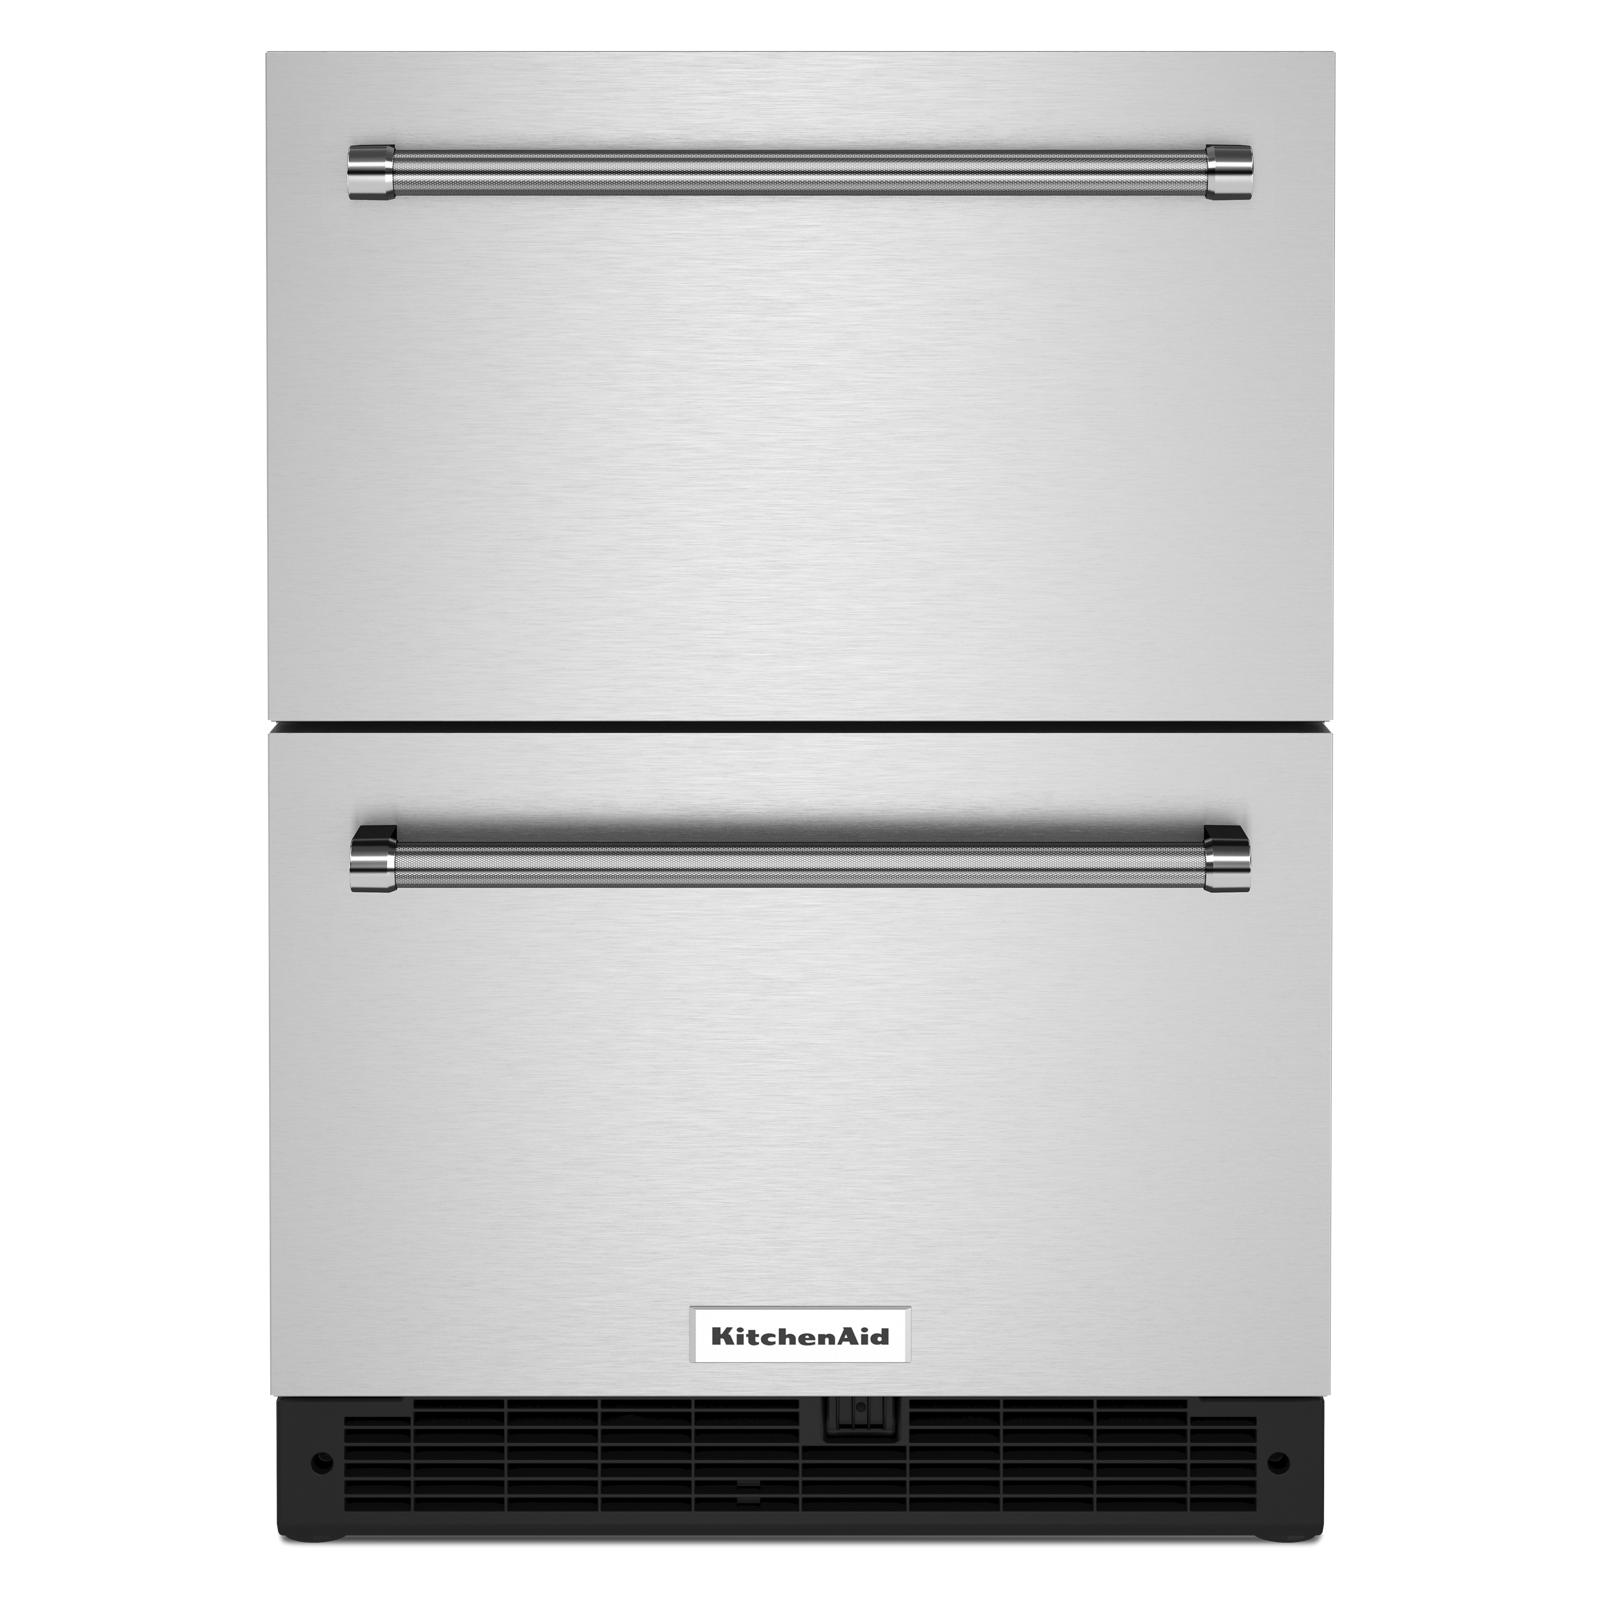 KitchenAid - 23.875 Inch 4.4 cu. ft Undercounter Double-Drawer Refrigerator in Stainless - KUDR204KSB